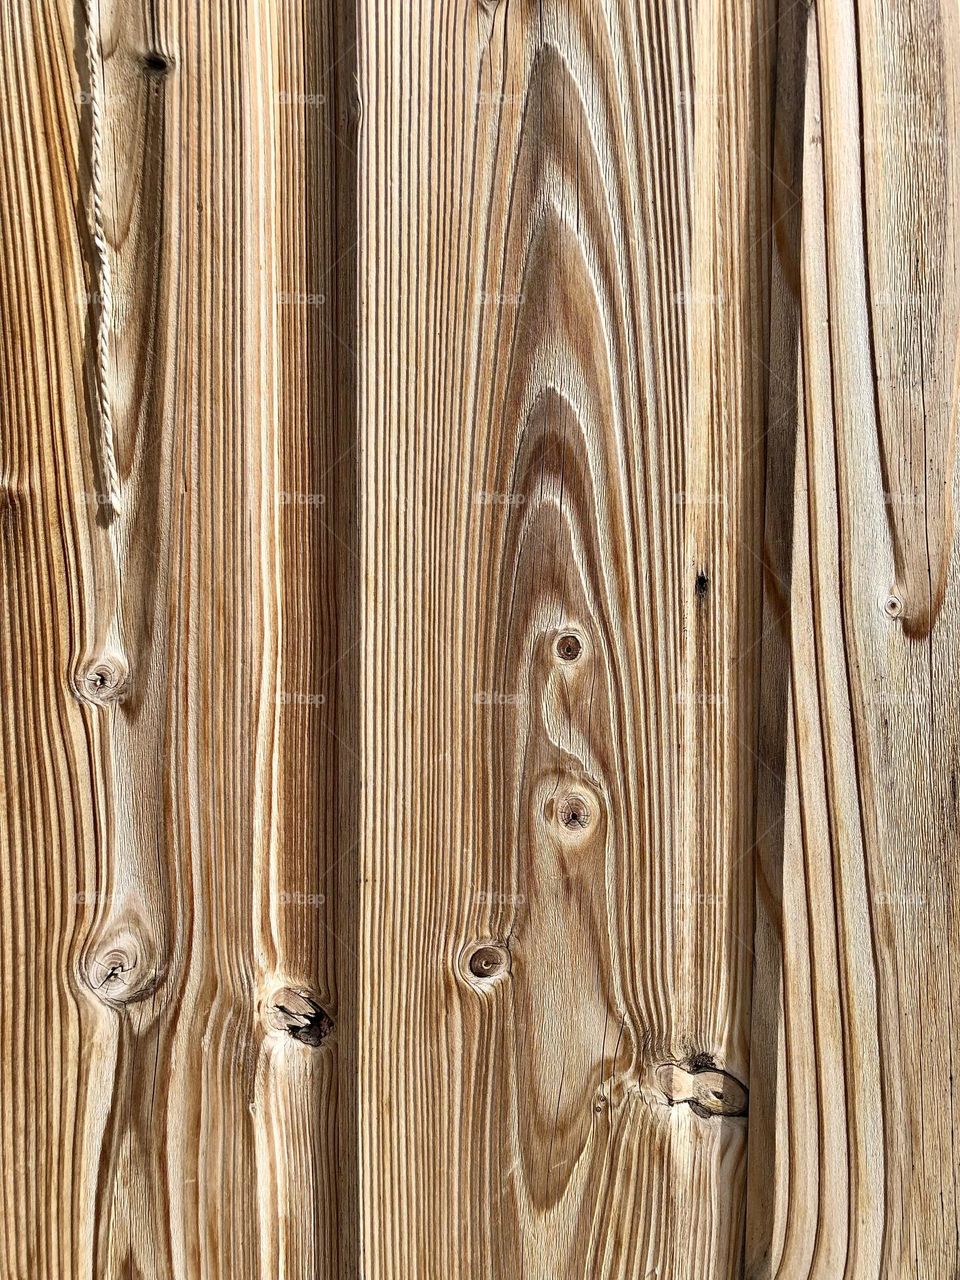 Plank of wood / Texture / 🇫🇷